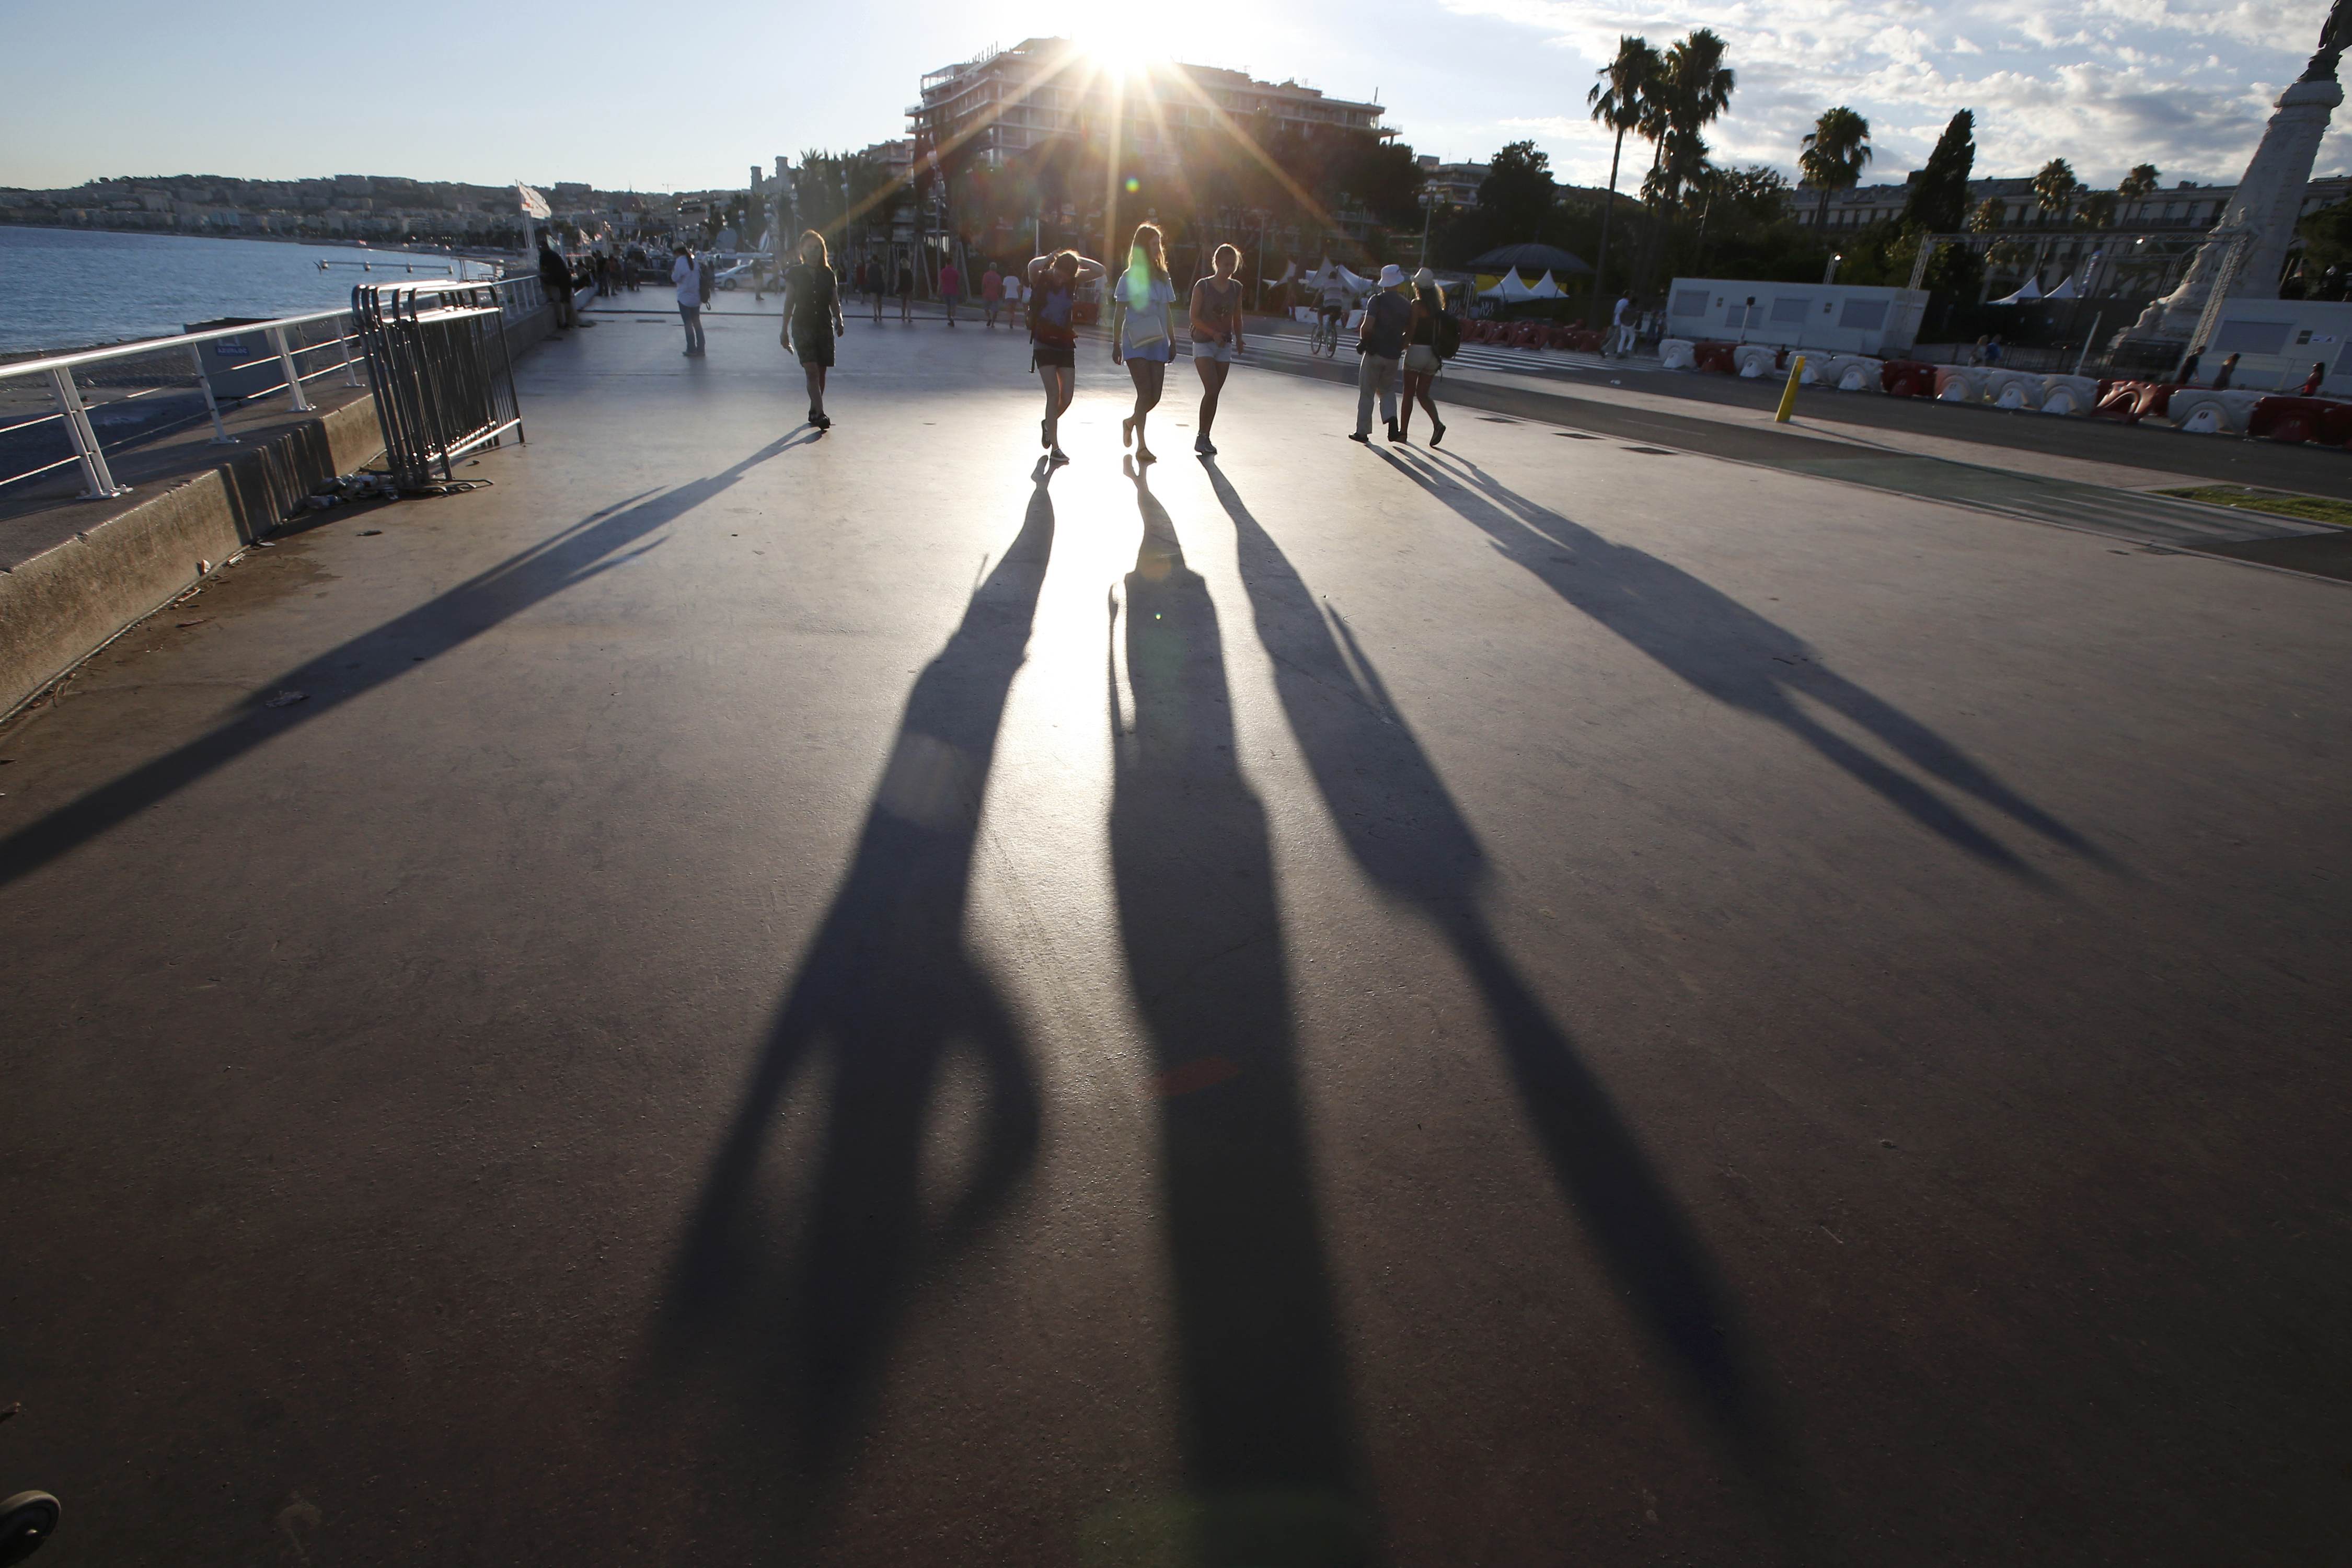 The sun casts long shadows as people walk on the Promenade des Anglais the day after a truckran into a crowd at high speed killing scores and injuring more who were celebrating the Bastille Day national holiday, in Nice, France, July 15, 2016. REUTERS/Eric Gaillard